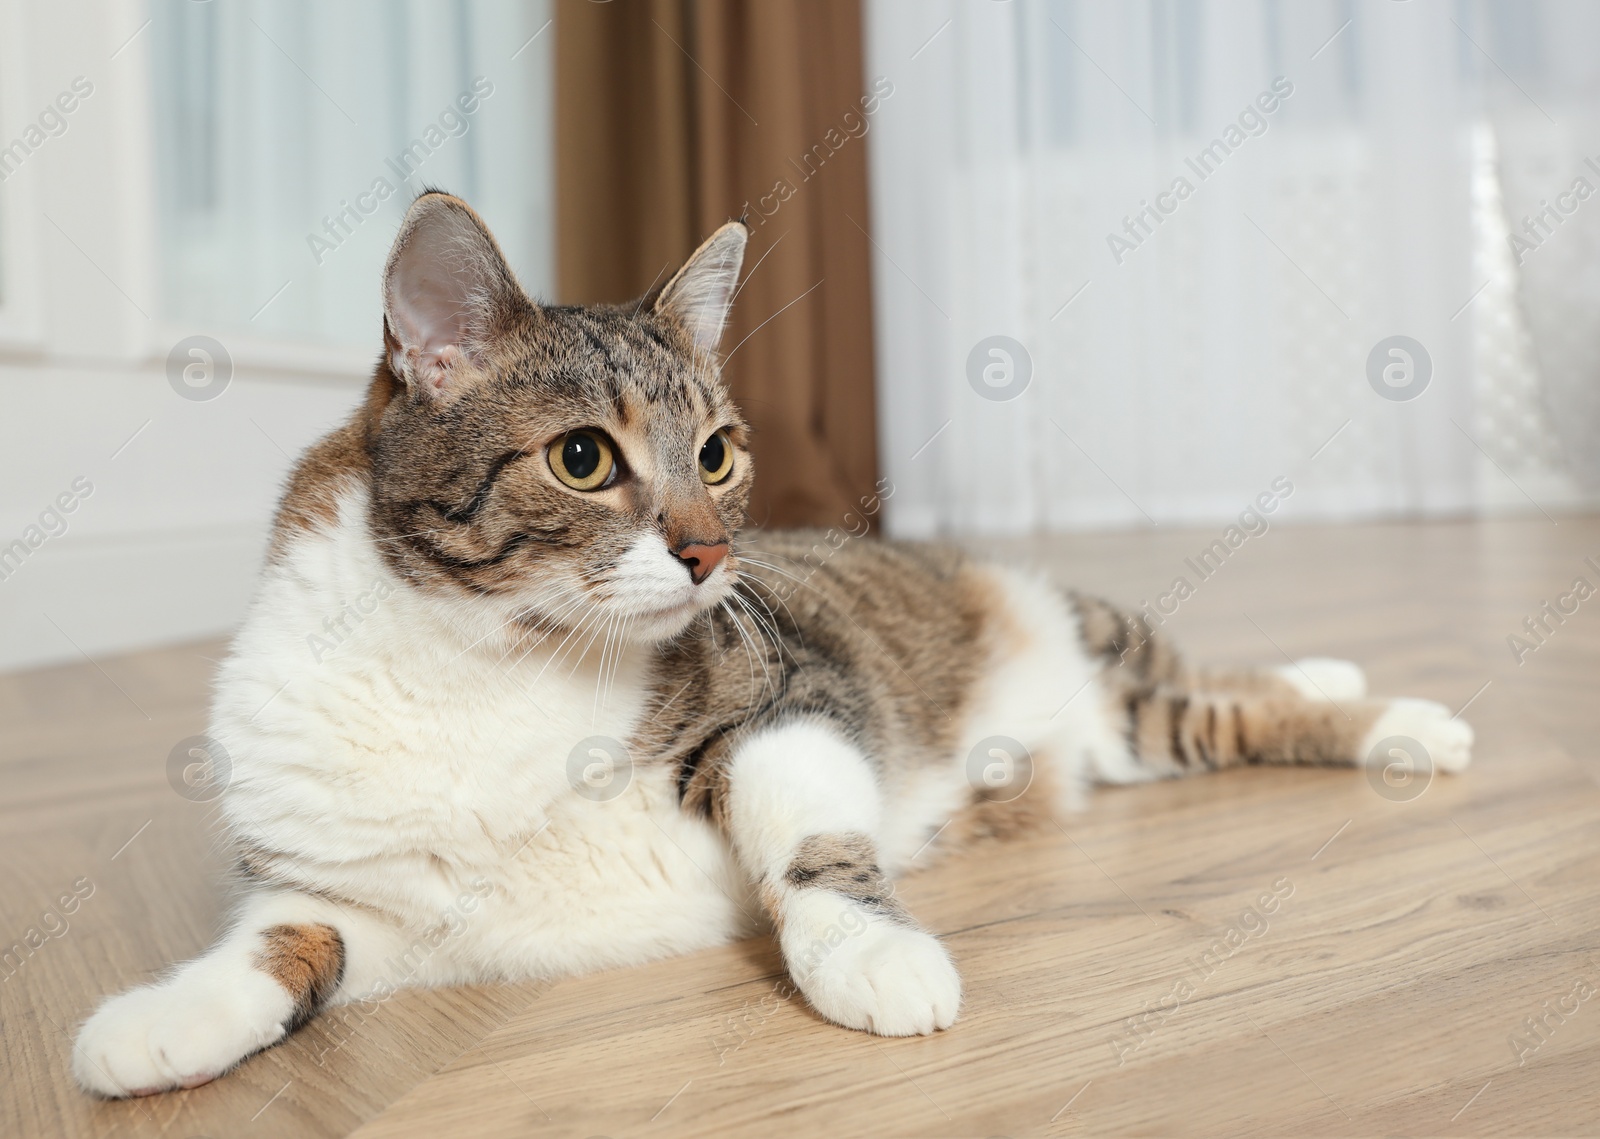 Photo of Cute cat resting on warm floor at home, space for text. Heating system